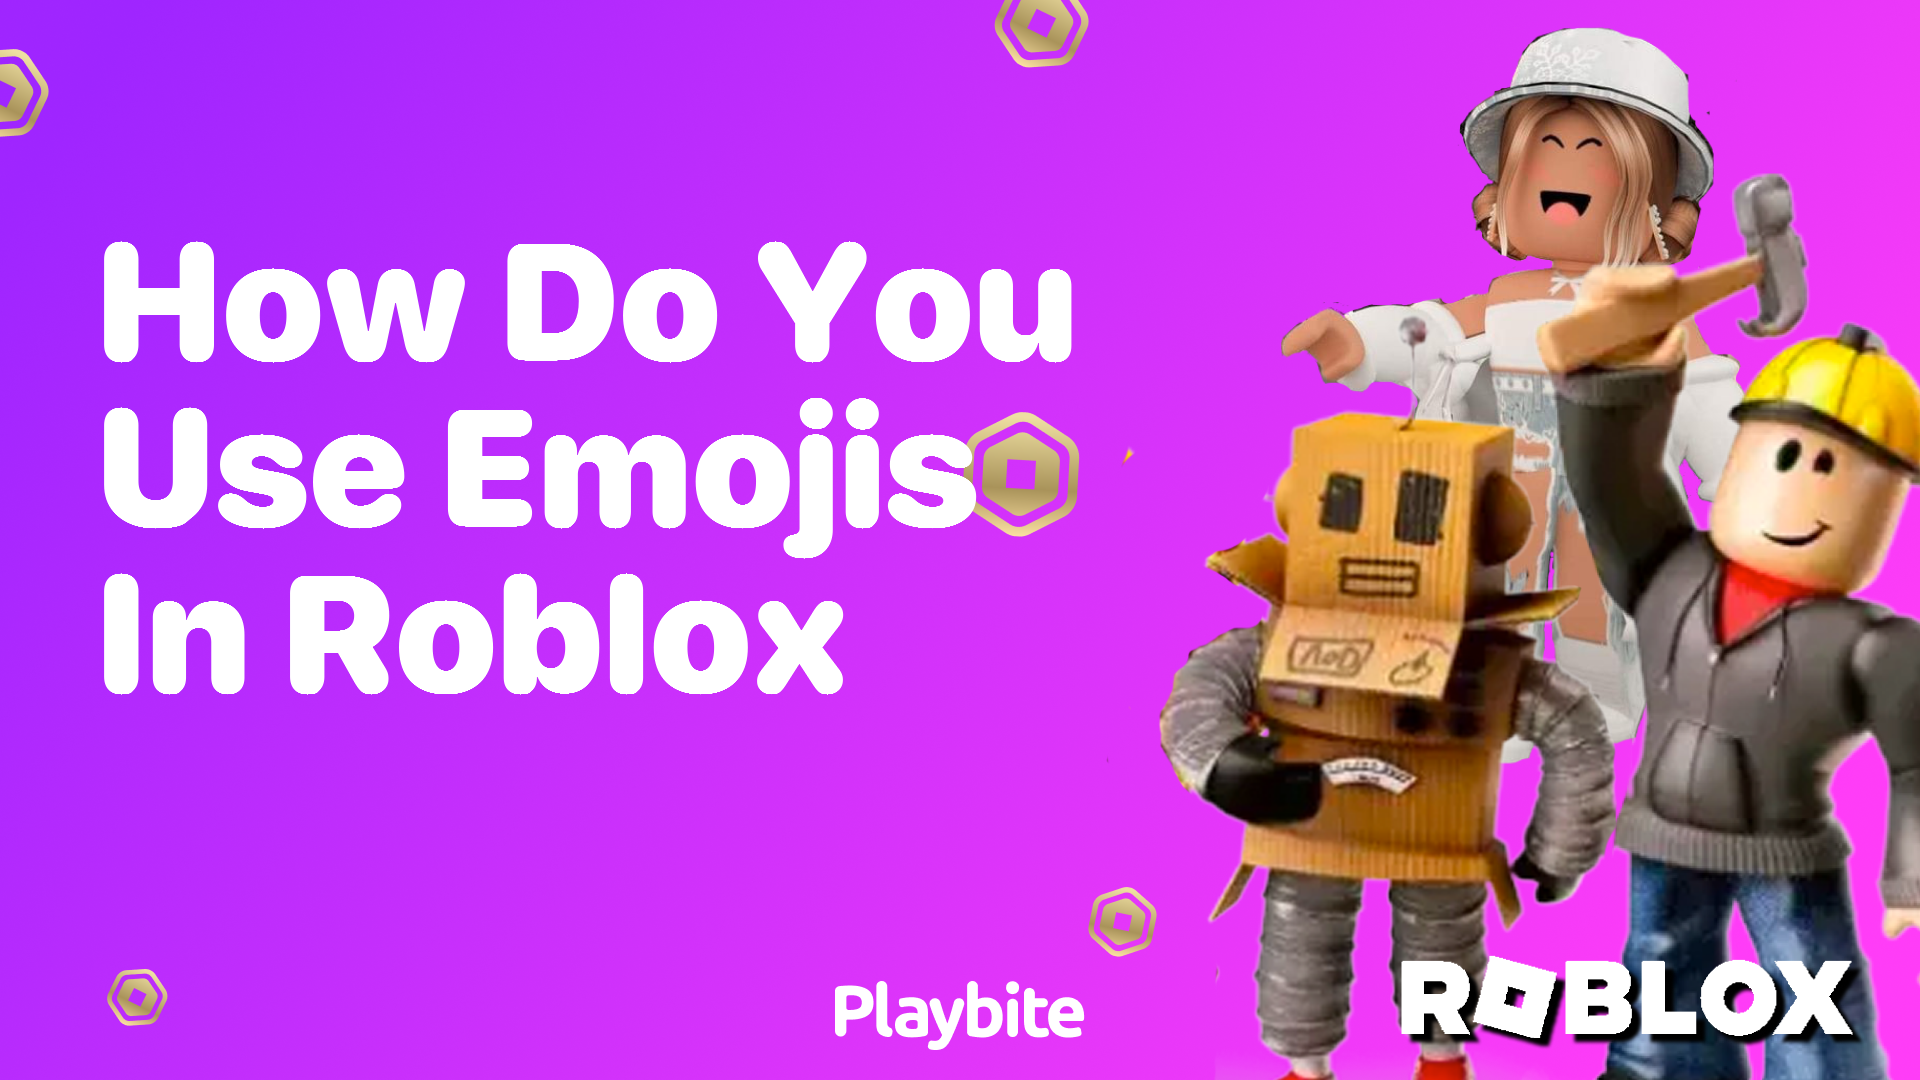 How Do You Use Emojis in Roblox?